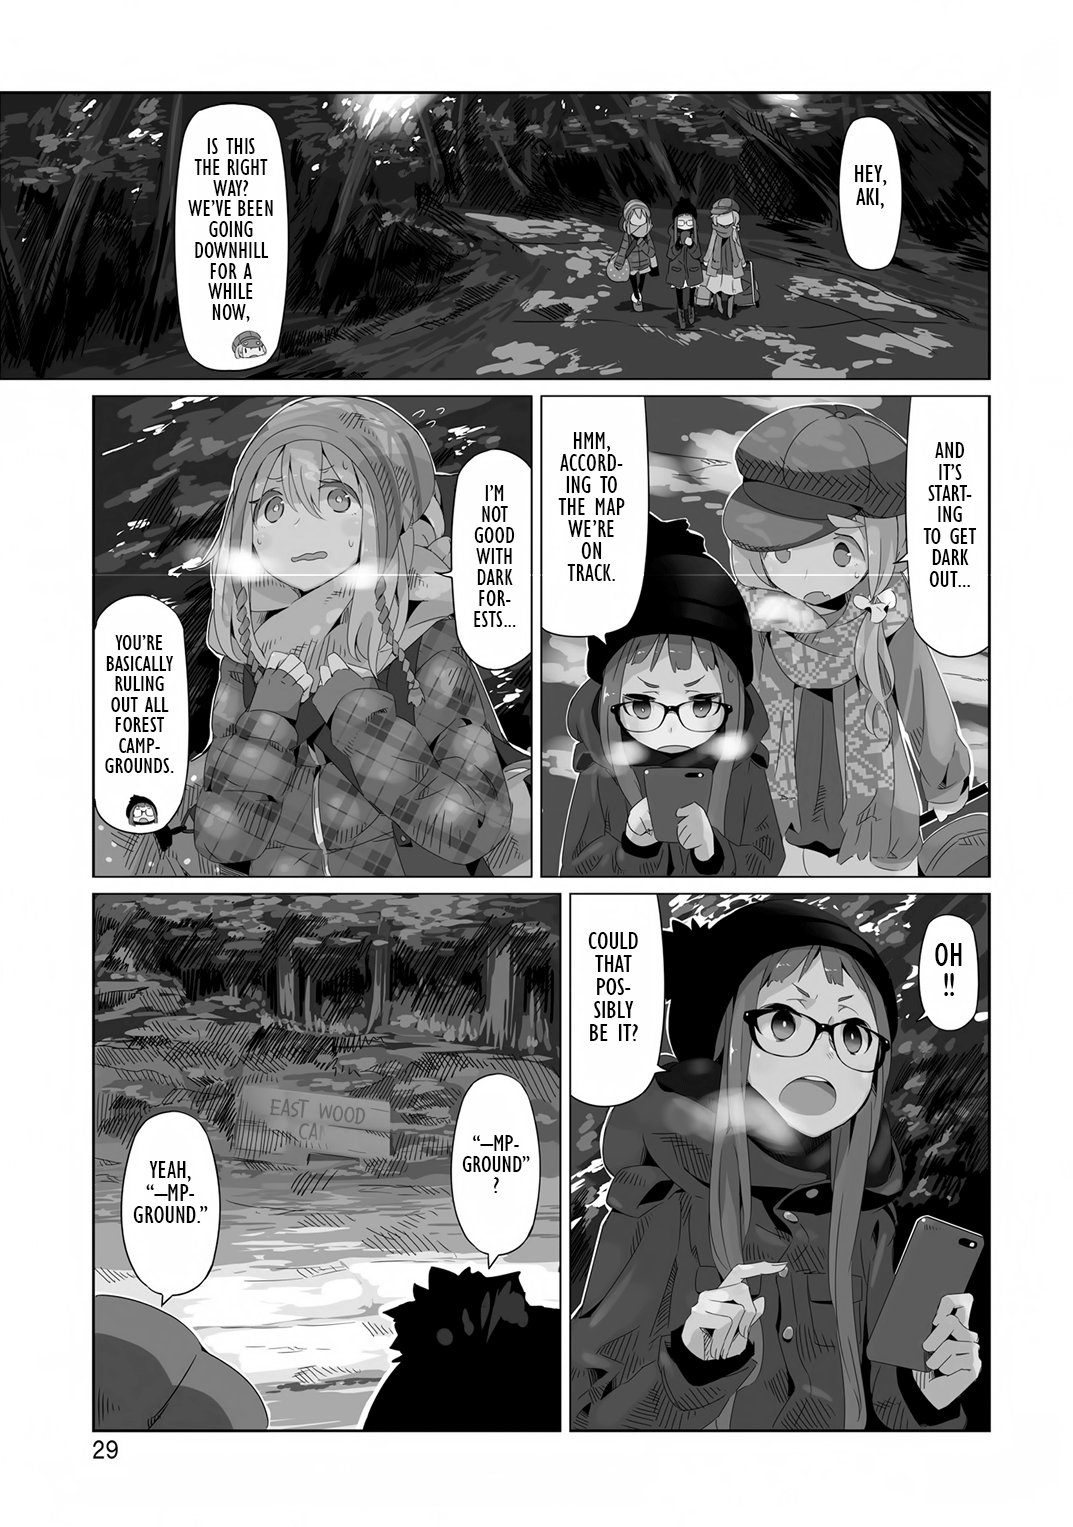 Yurucamp △ Vol.2 Chapter 8: The Scenery They Share, Camping Apart - Picture 1